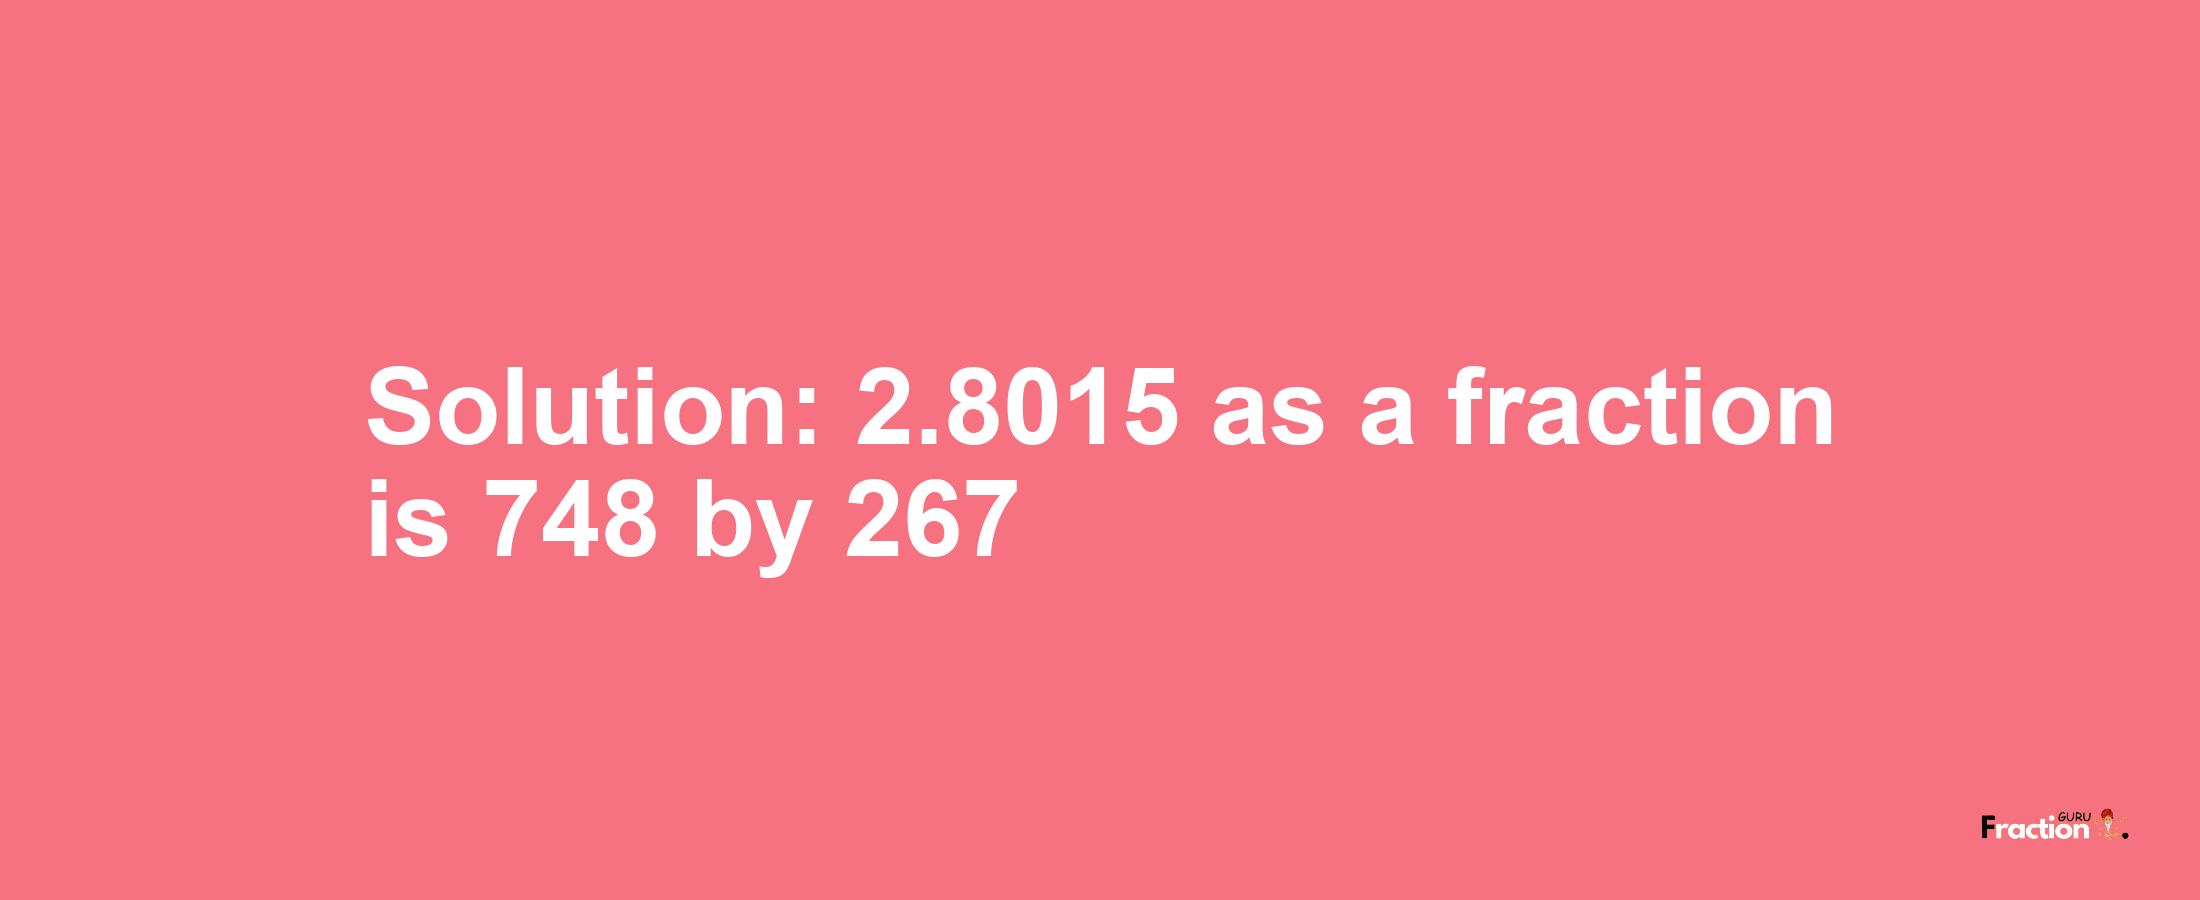 Solution:2.8015 as a fraction is 748/267